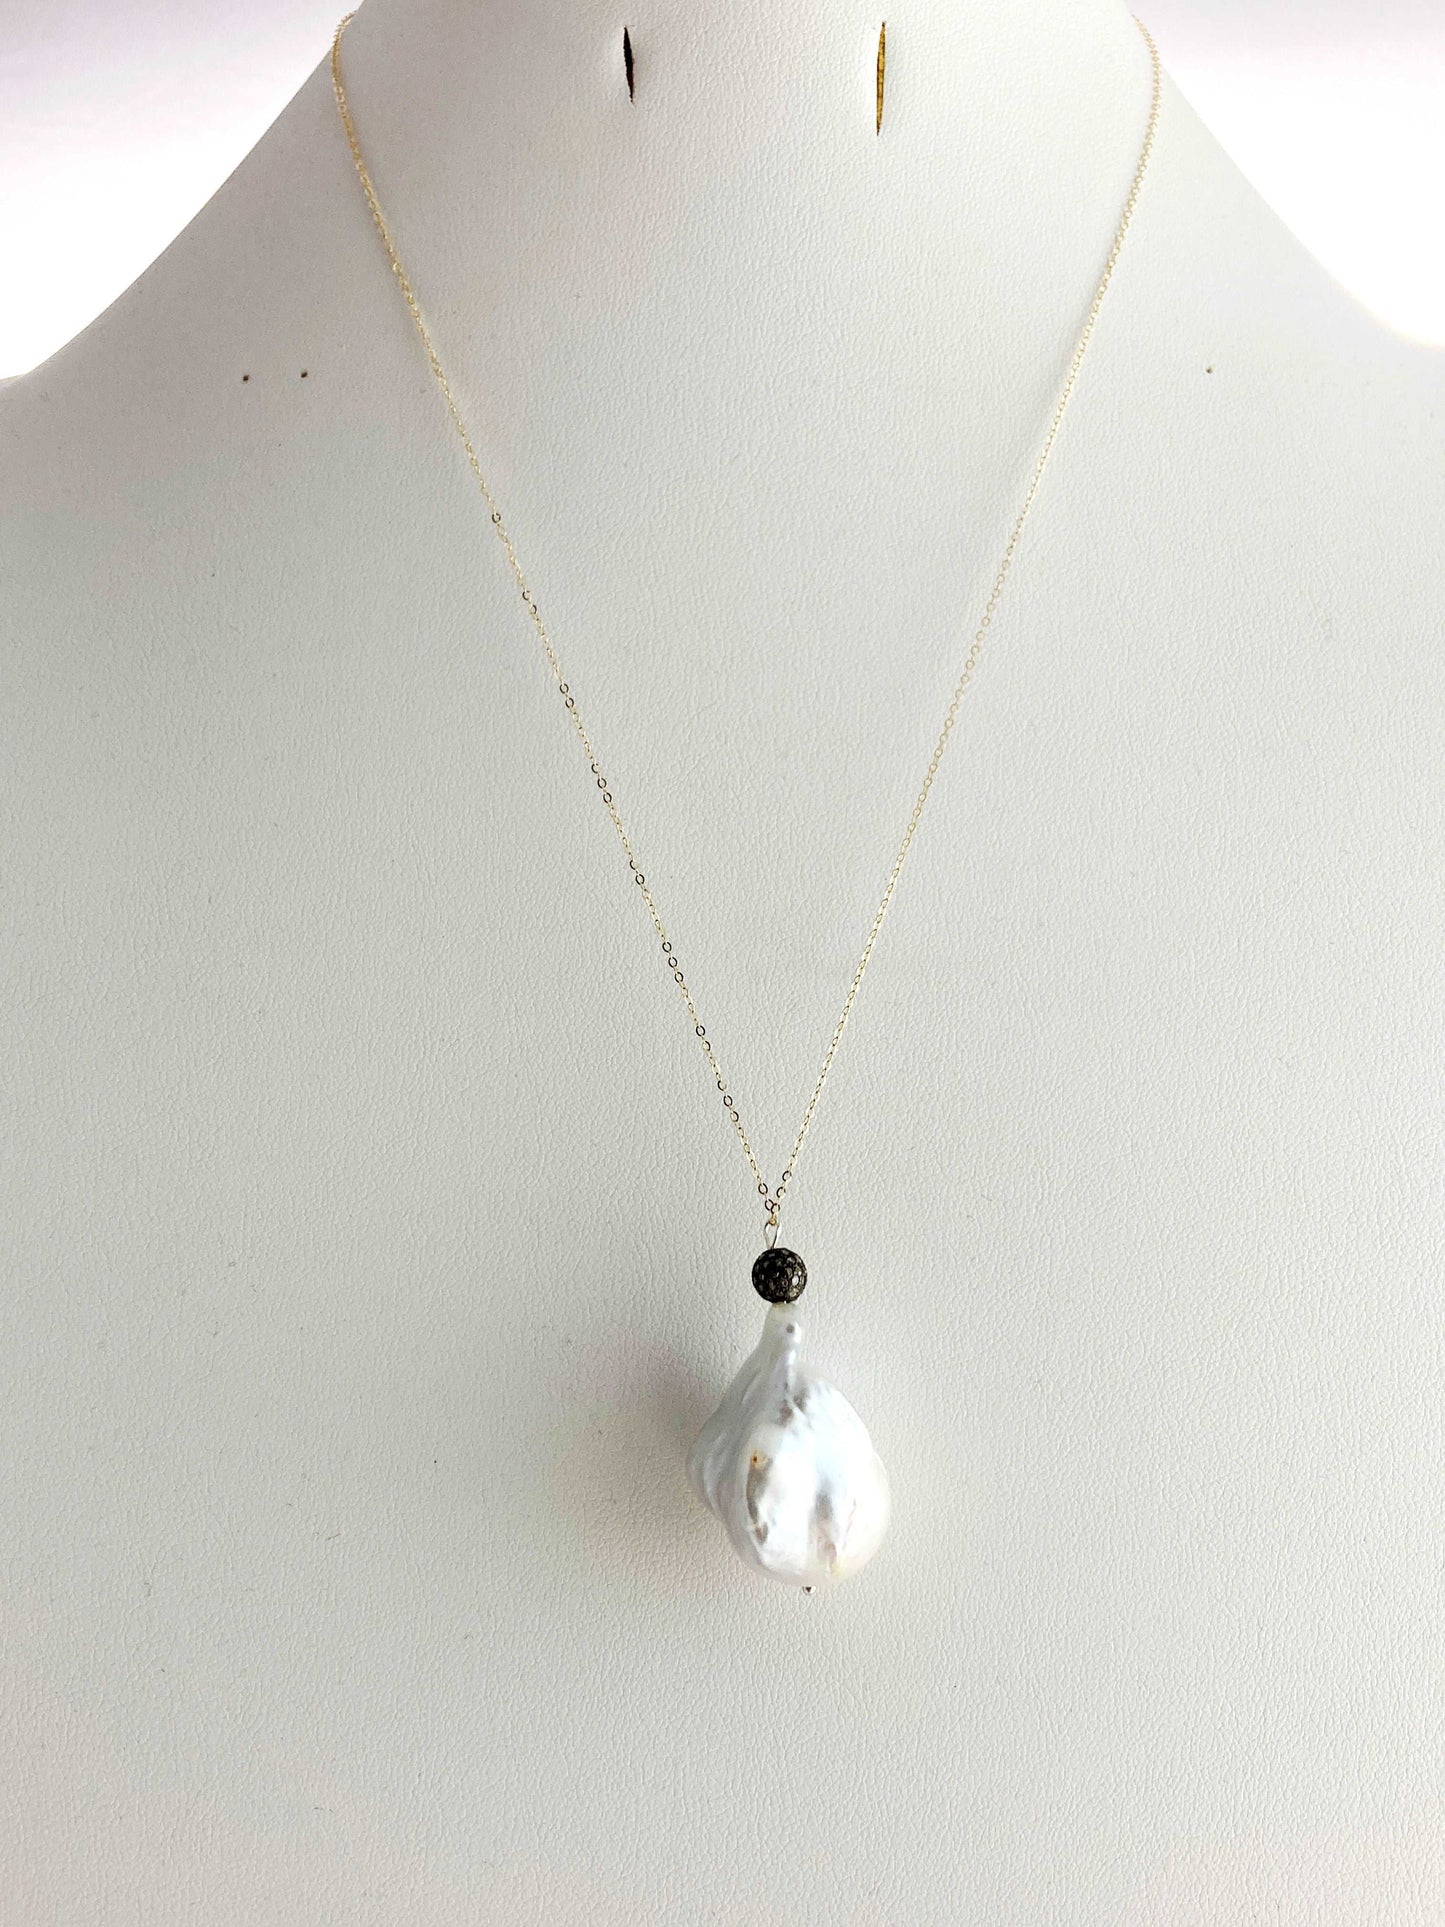 Unique one of a kind Baroque pearl necklaces - Providence silver gold jewelry usa